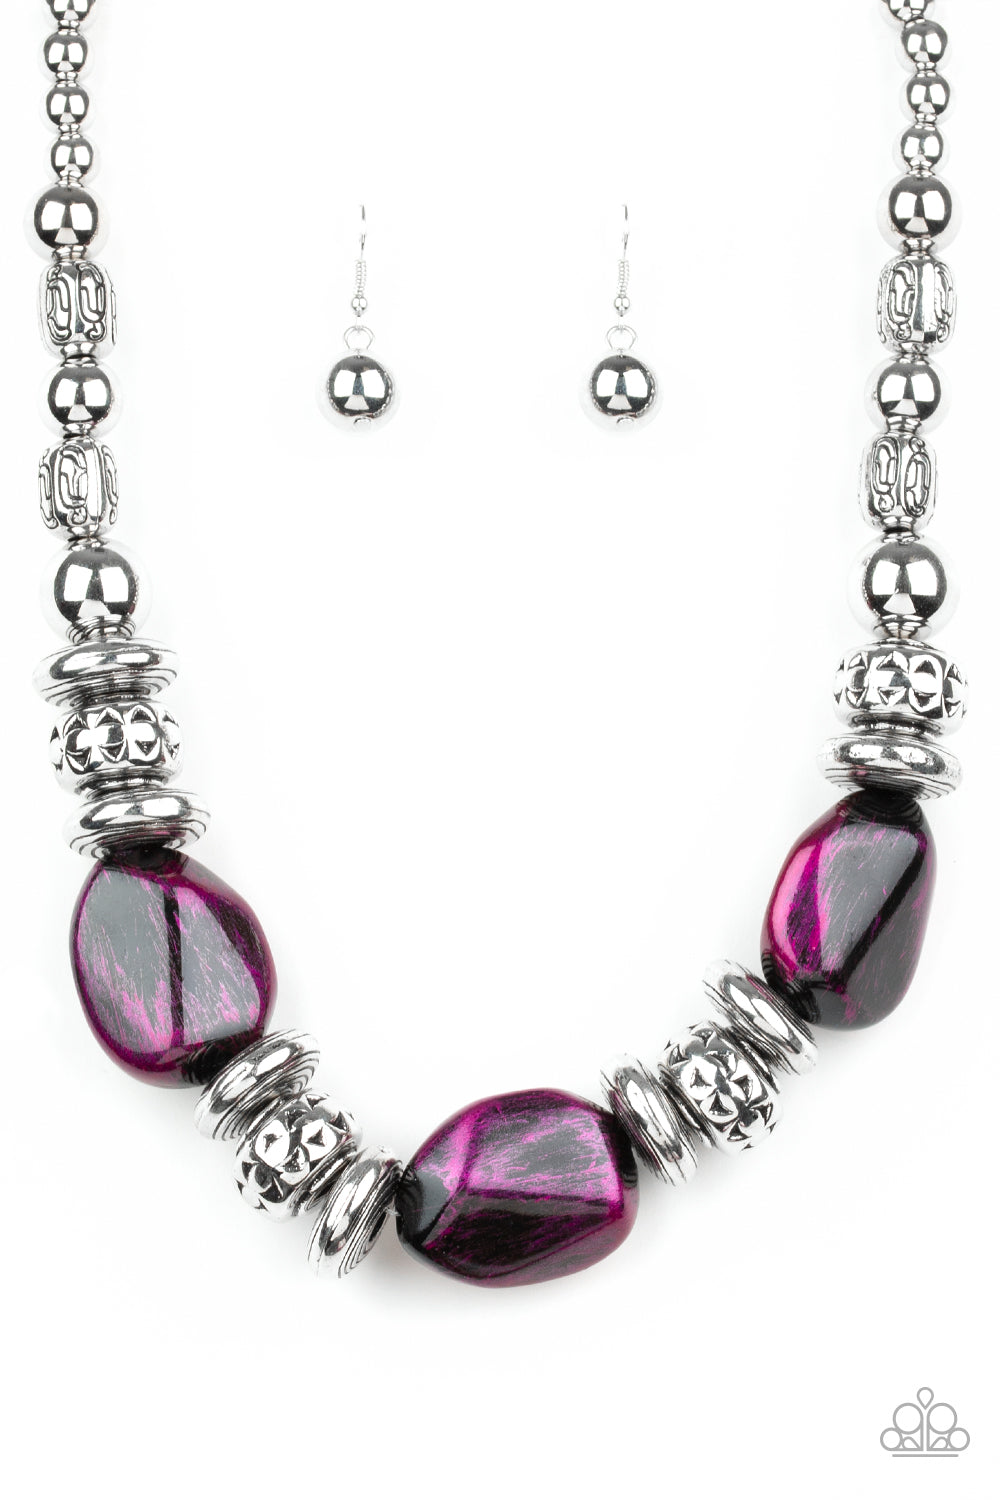 Colorfully Confident Purple Necklace - Paparazzi Accessories Item #N310 A collection of classic silver beads, ornate silver accents, and metallic purple faux rock beads are threaded along an invisible wire below the collar for a statement-making finish. Features an adjustable clasp closure. All Paparazzi Accessories are lead free and nickel free!  Sold as one individual necklace. Includes one pair of matching earrings.